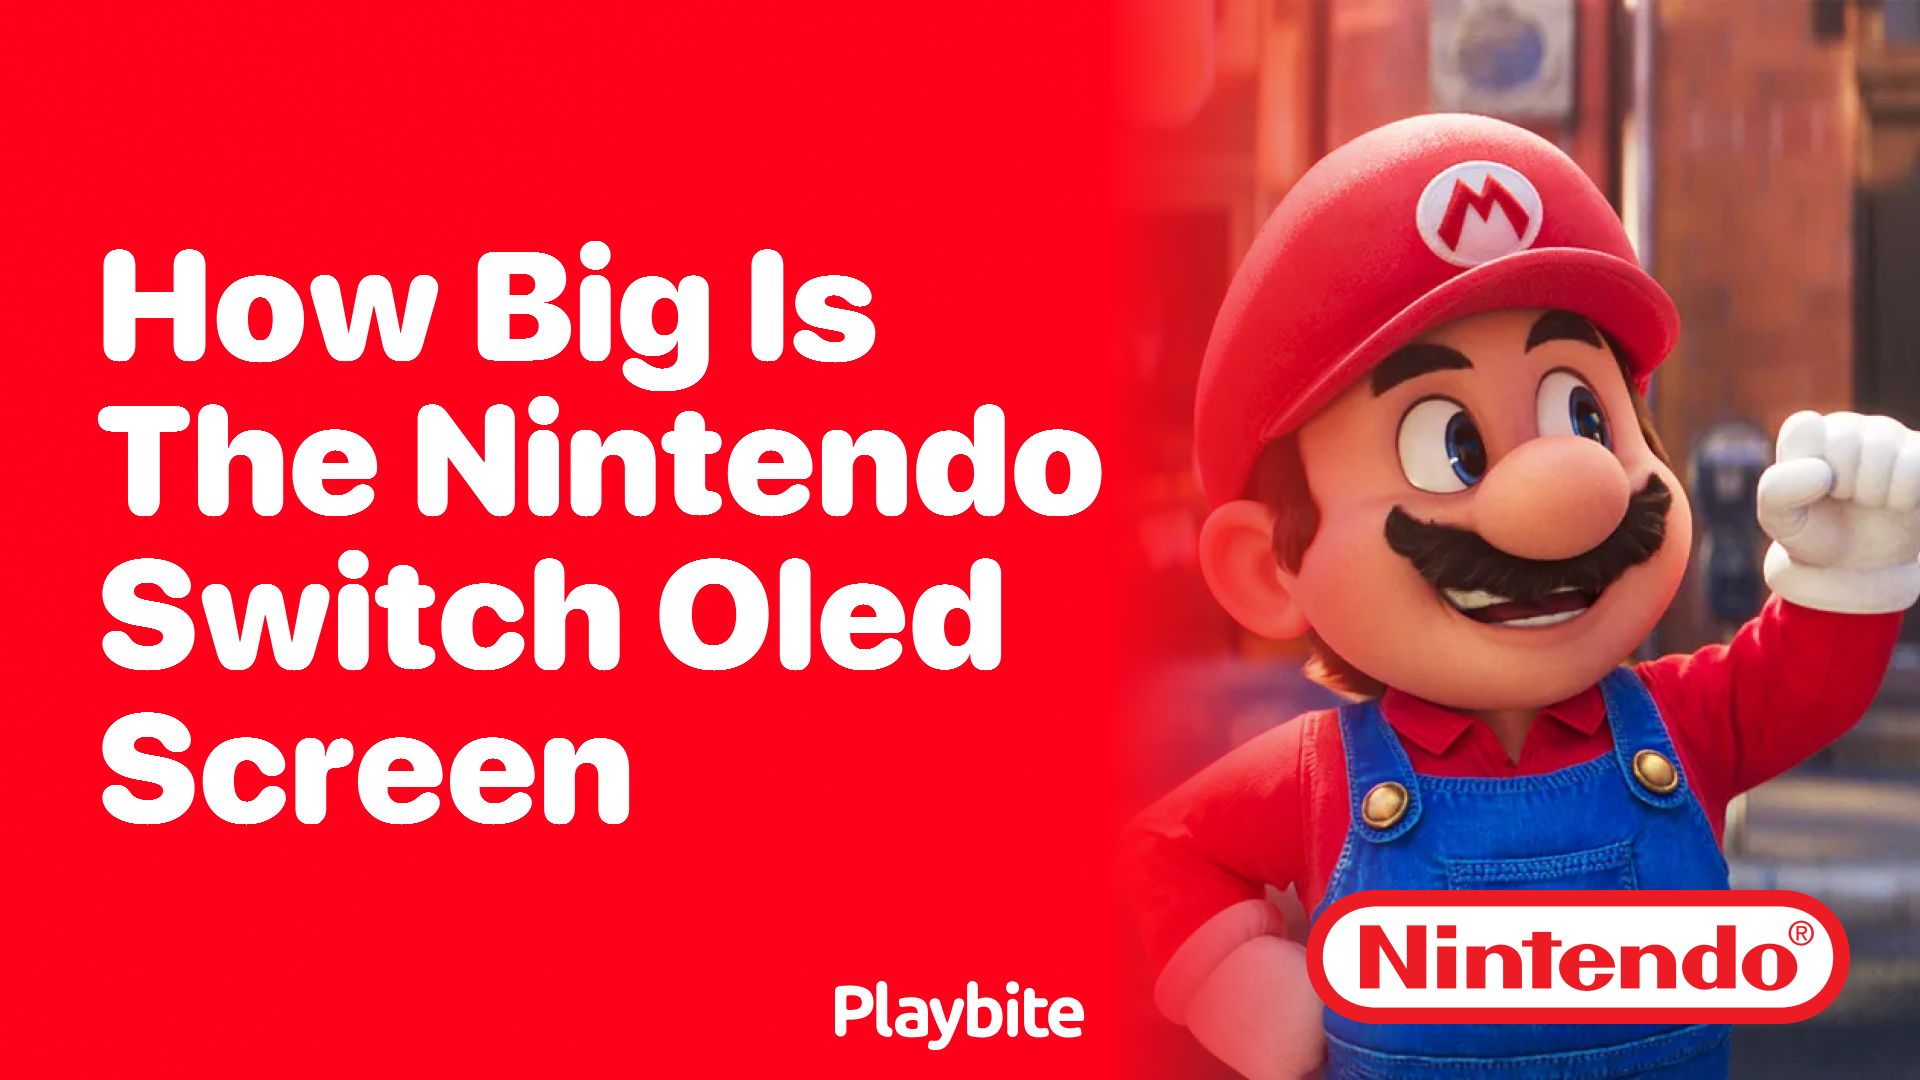 Nintendo is making a bright red Switch OLED for Mario Wonder - The